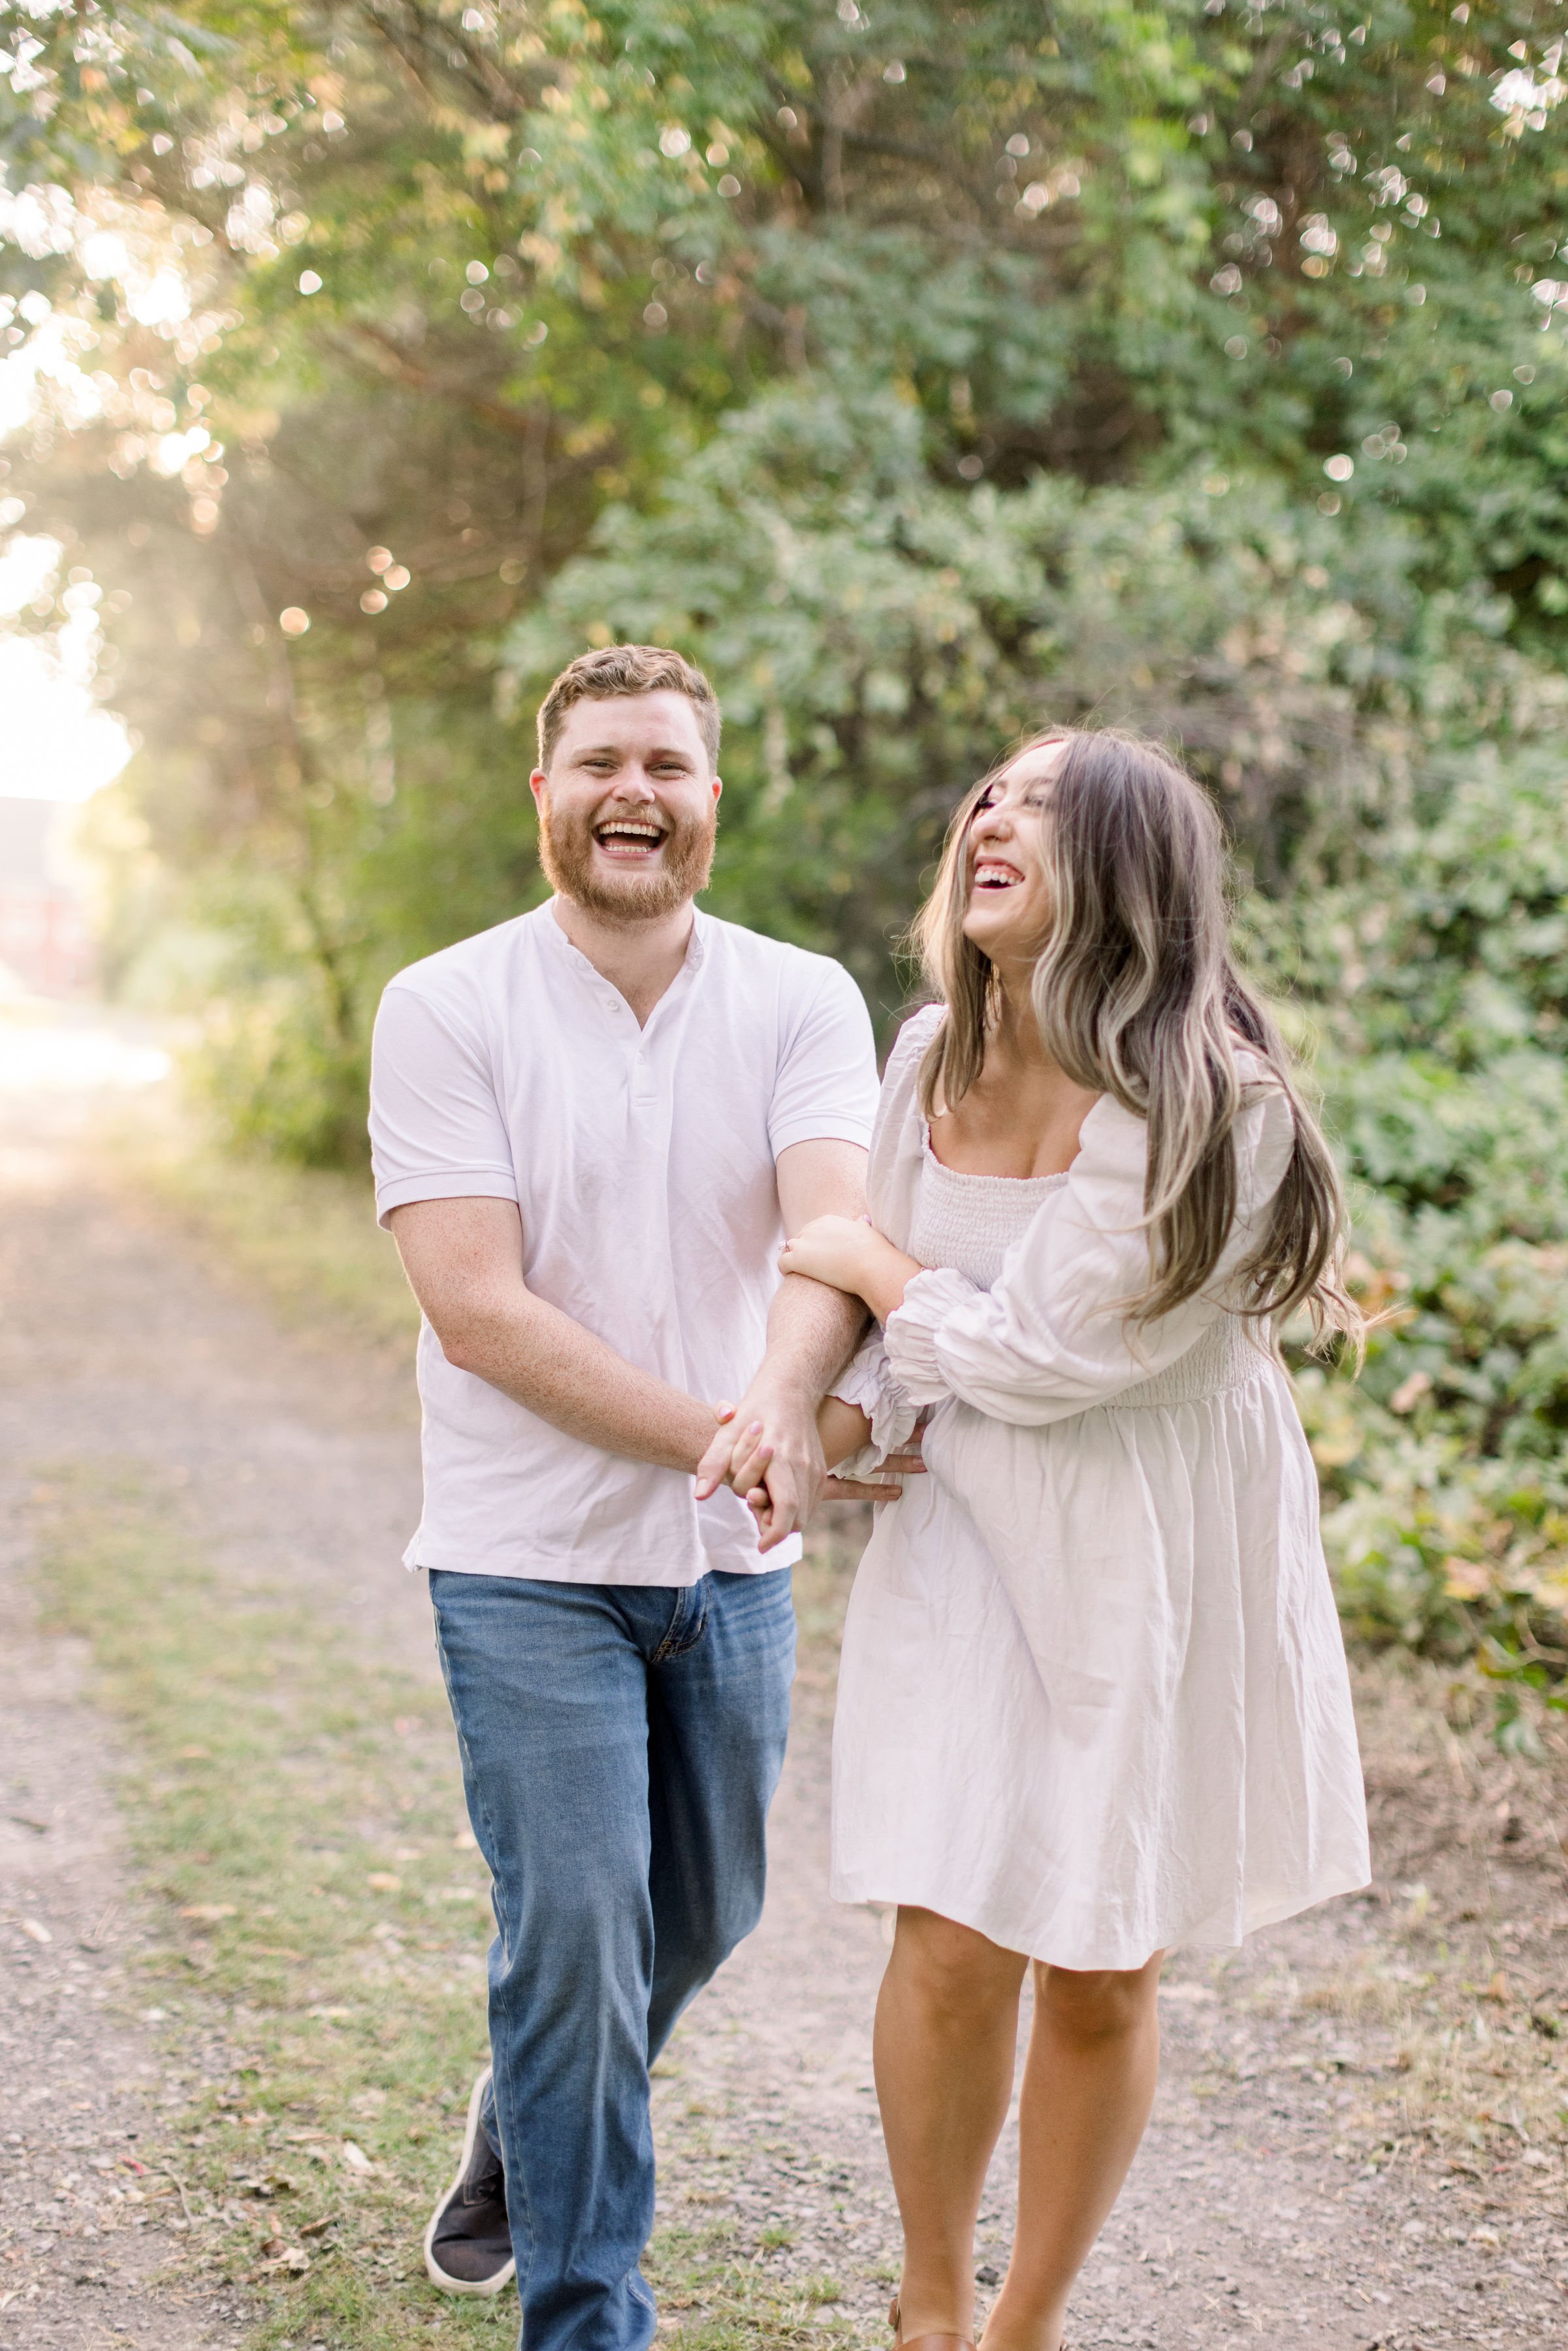  A cute couple laughing at one another was captured by Chelsea Mason Photography in Ottawa. Ottawa engagements laughing #ChelseaMasonPhotography #ChelseaMasonEngagements #Ottawaphotographers #ArboretumOttawaEngagments #weddingannouncementportraits 